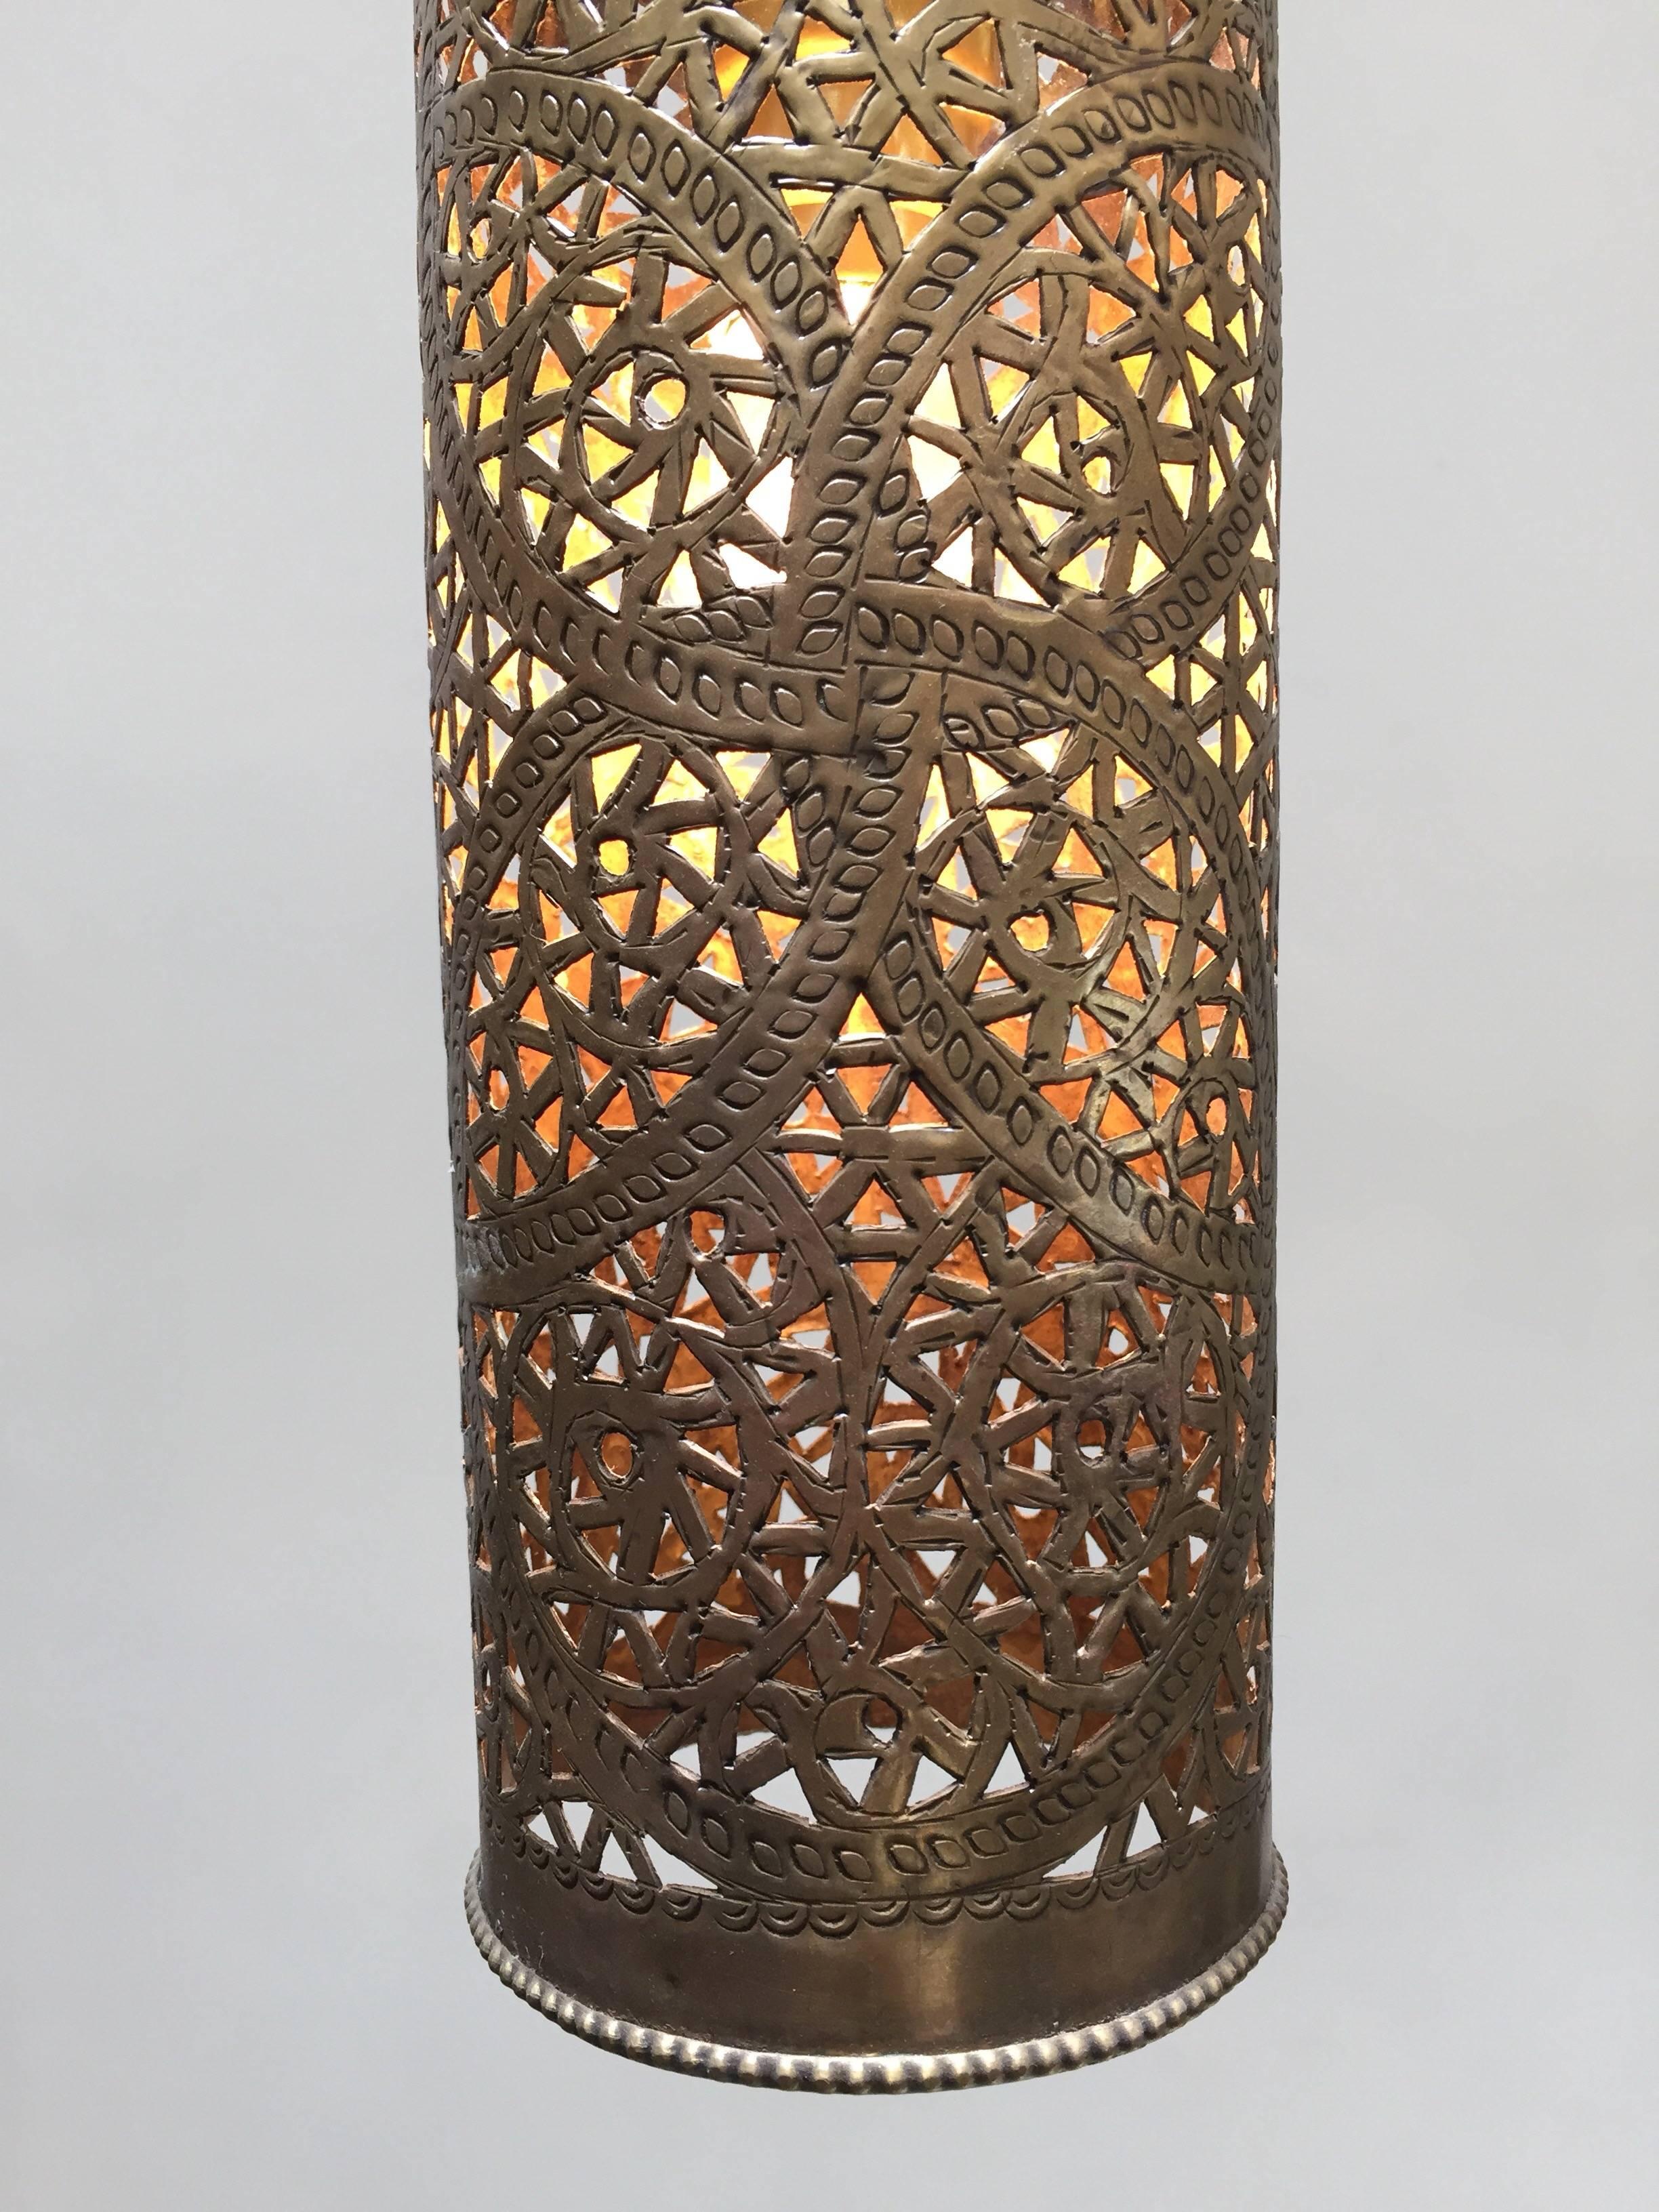 Pair of Moroccan brass pendants lights in cylinder form.
Nice handcrafted lanterns with Moorish geometric brass filigree openwork hammered and pierced design.
Rewired for one light bulb.
Total height with chain and ceiling canopy: 33 inches,